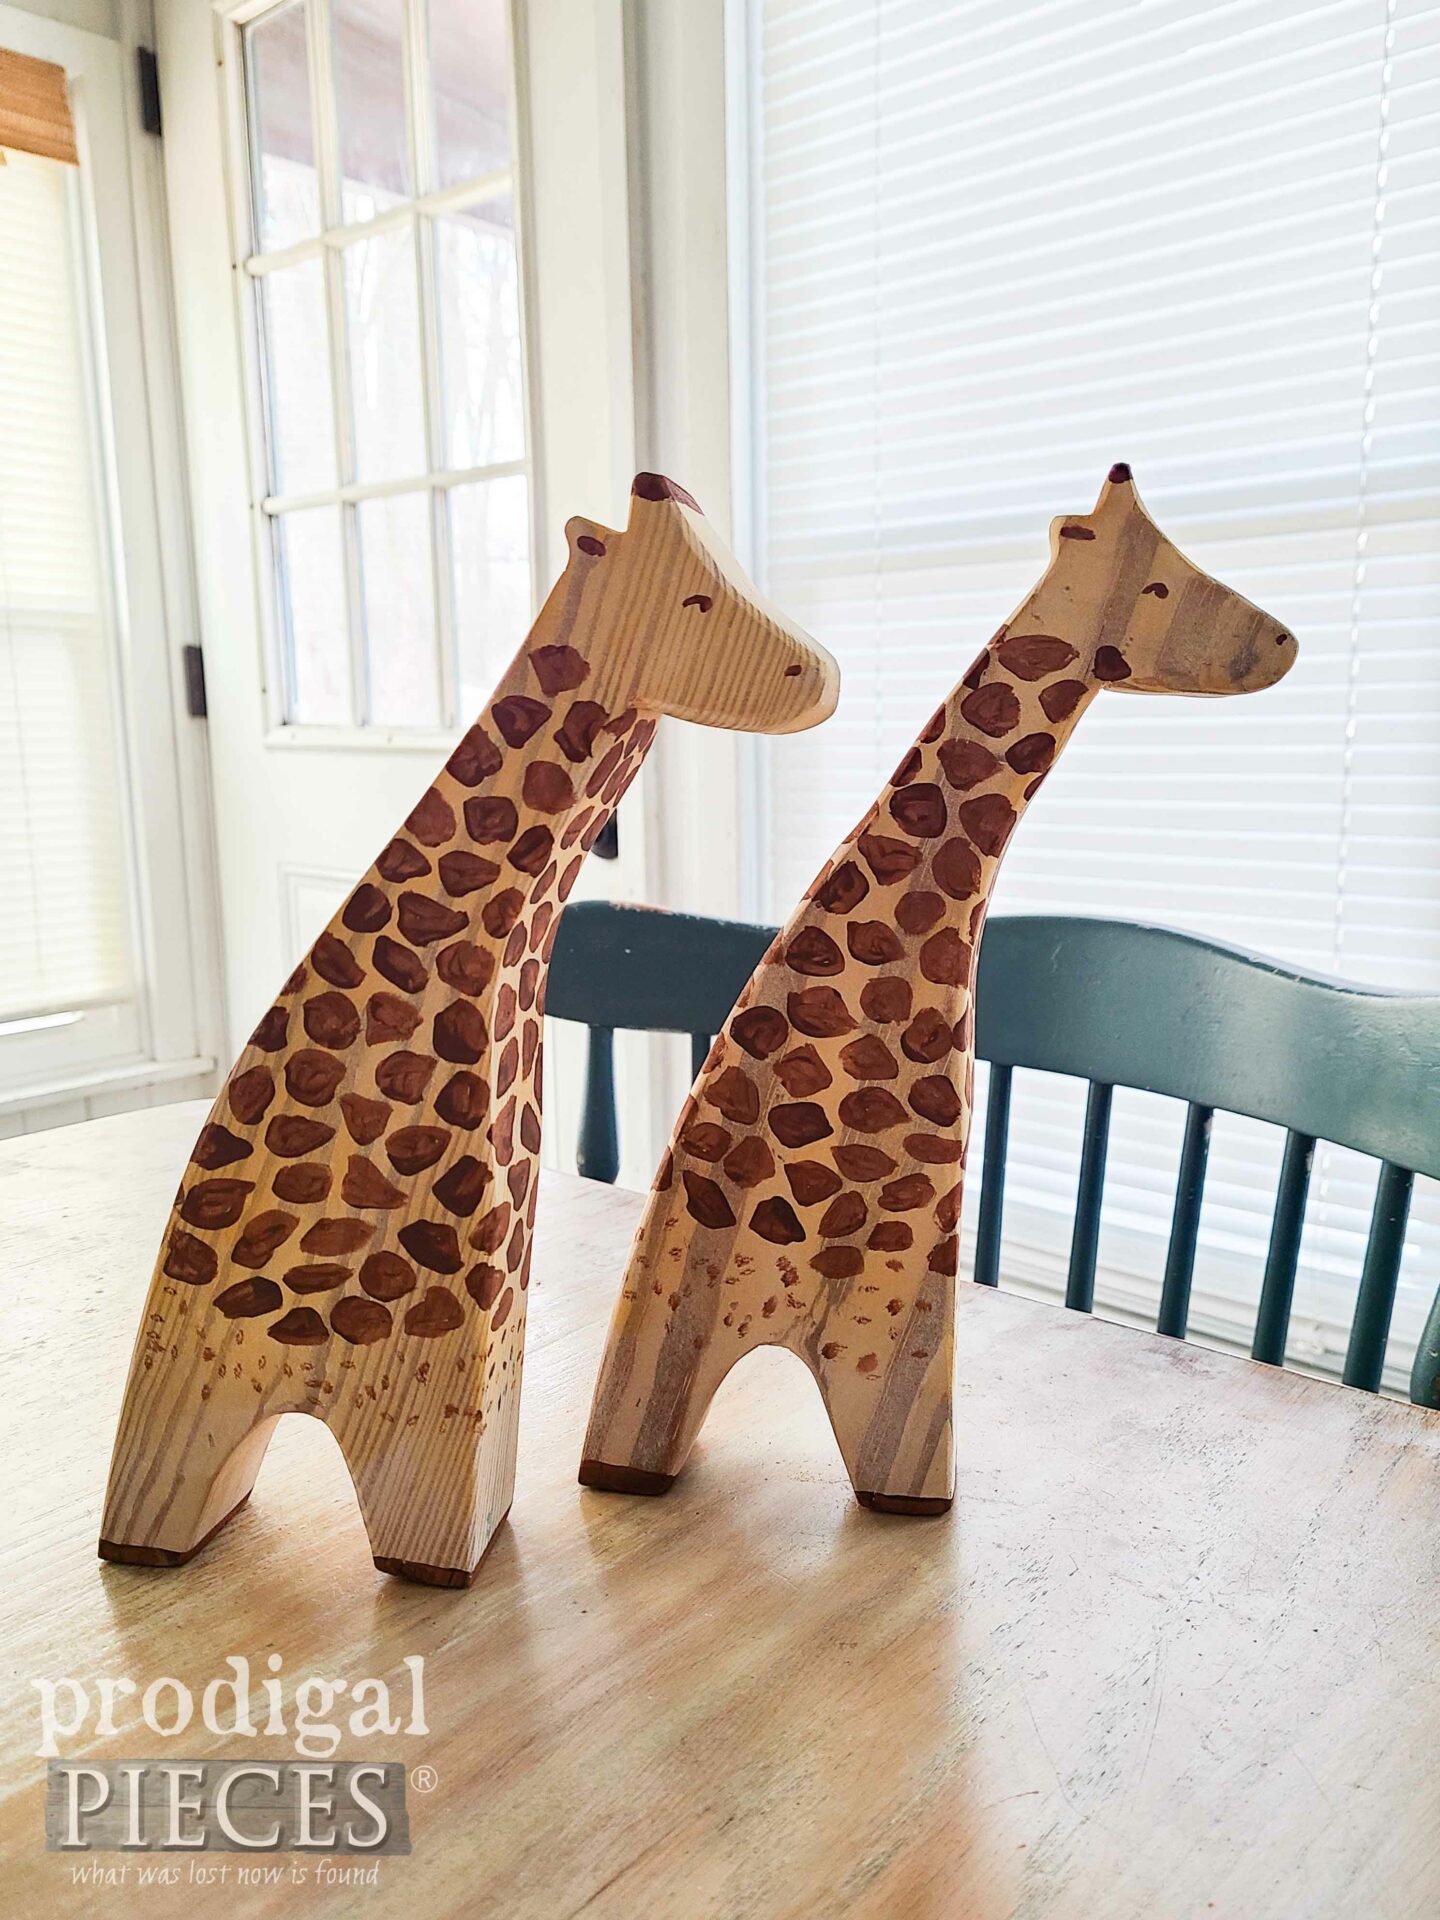 Hand-Painted Giraffes | Reclaimed Wooden Toys by Larissa of Prodigal Pieces | prodigalpieces.com #prodigalpieces